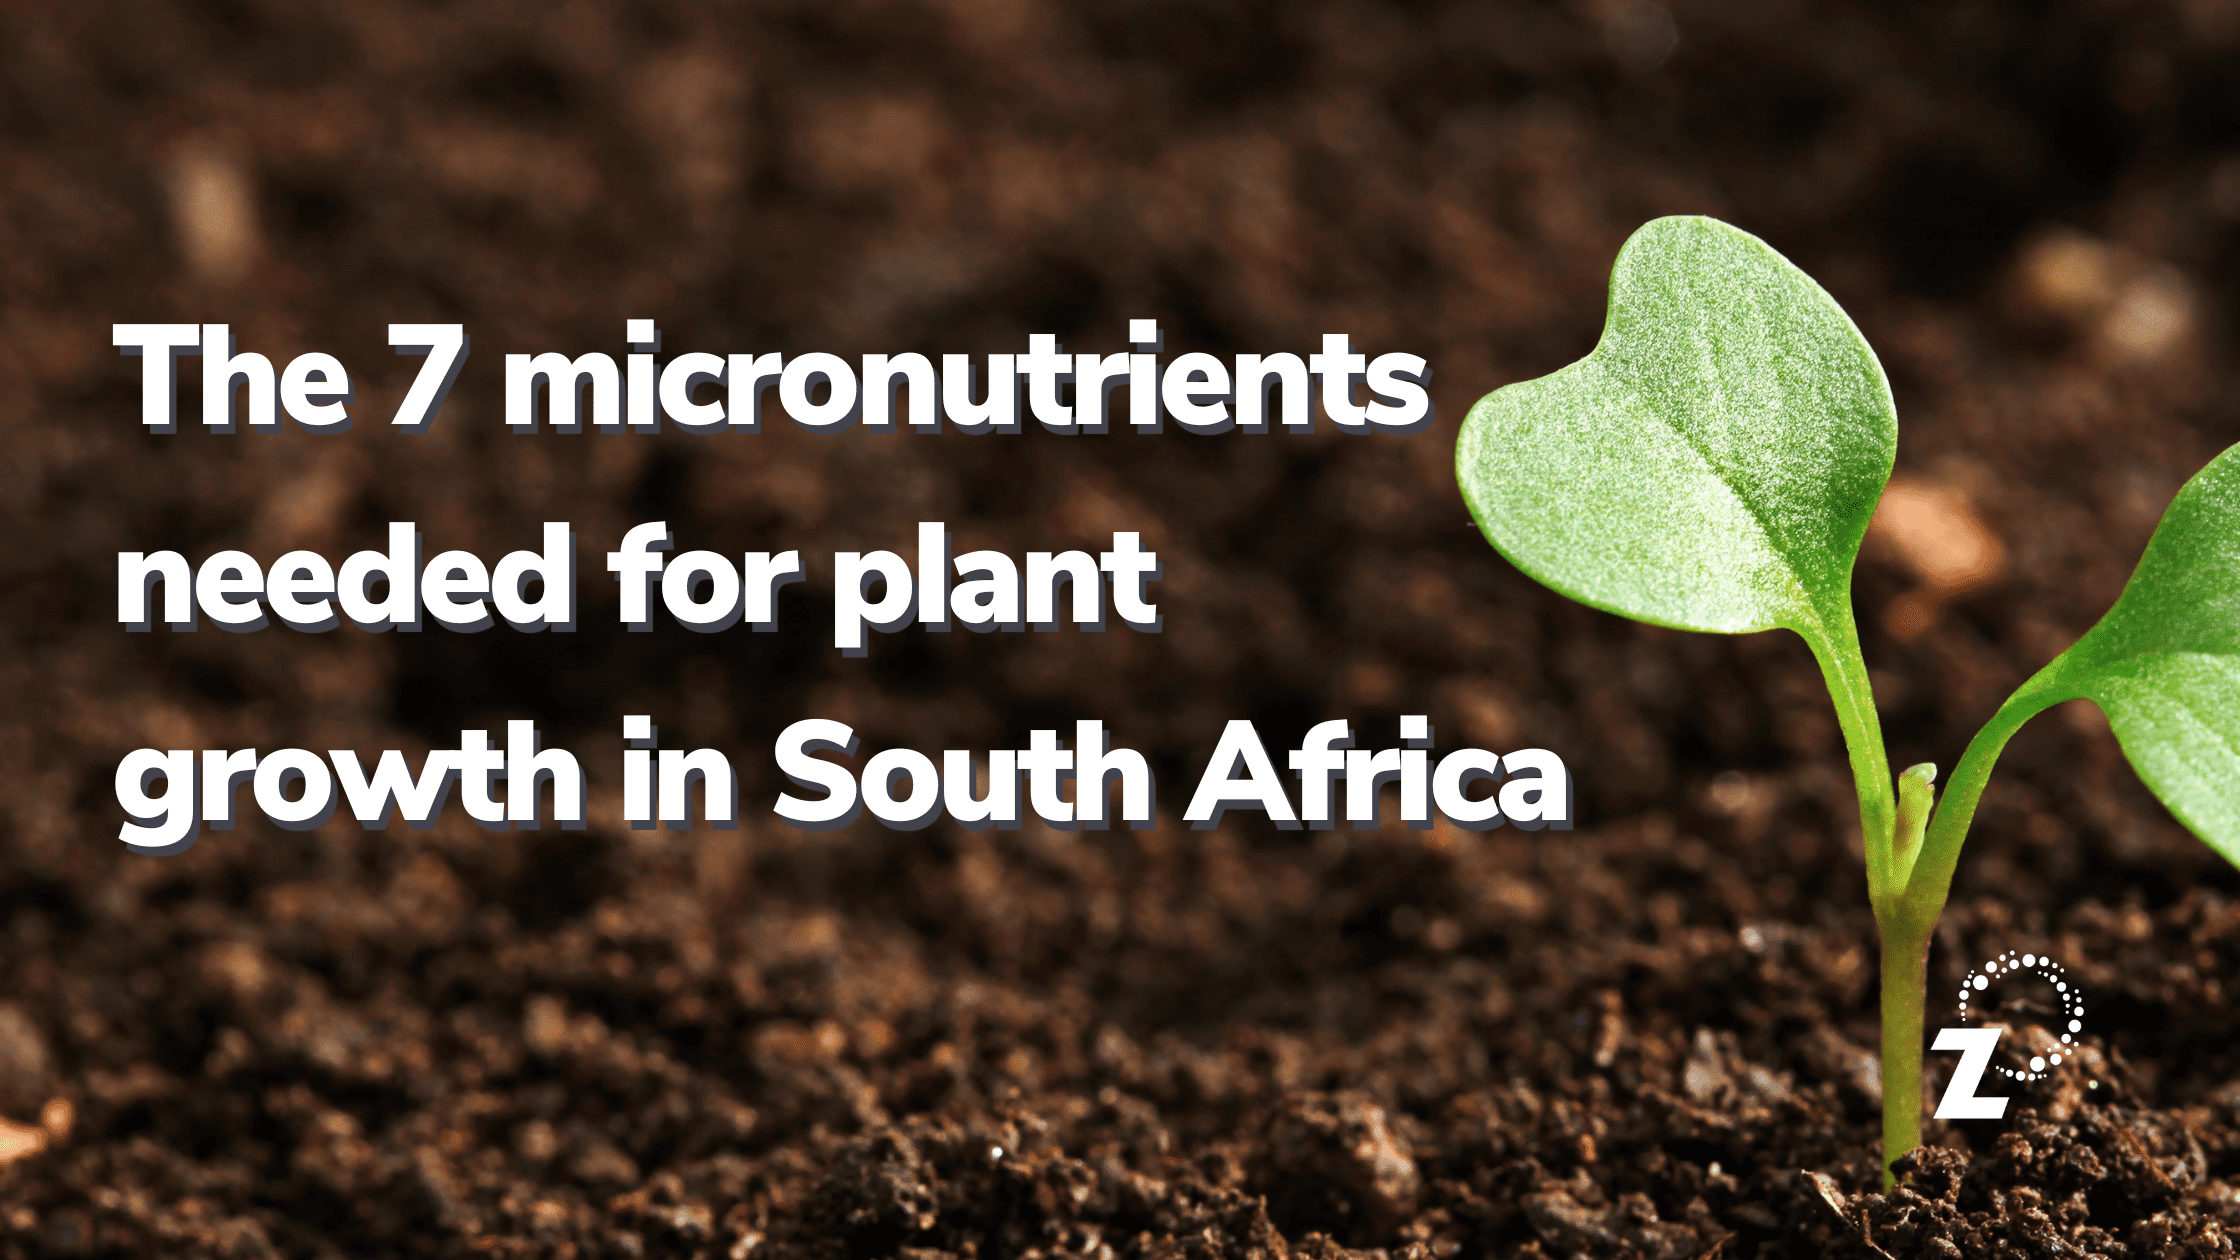 Featured image for “The 7 micronutrients needed for plant growth in South Africa ”